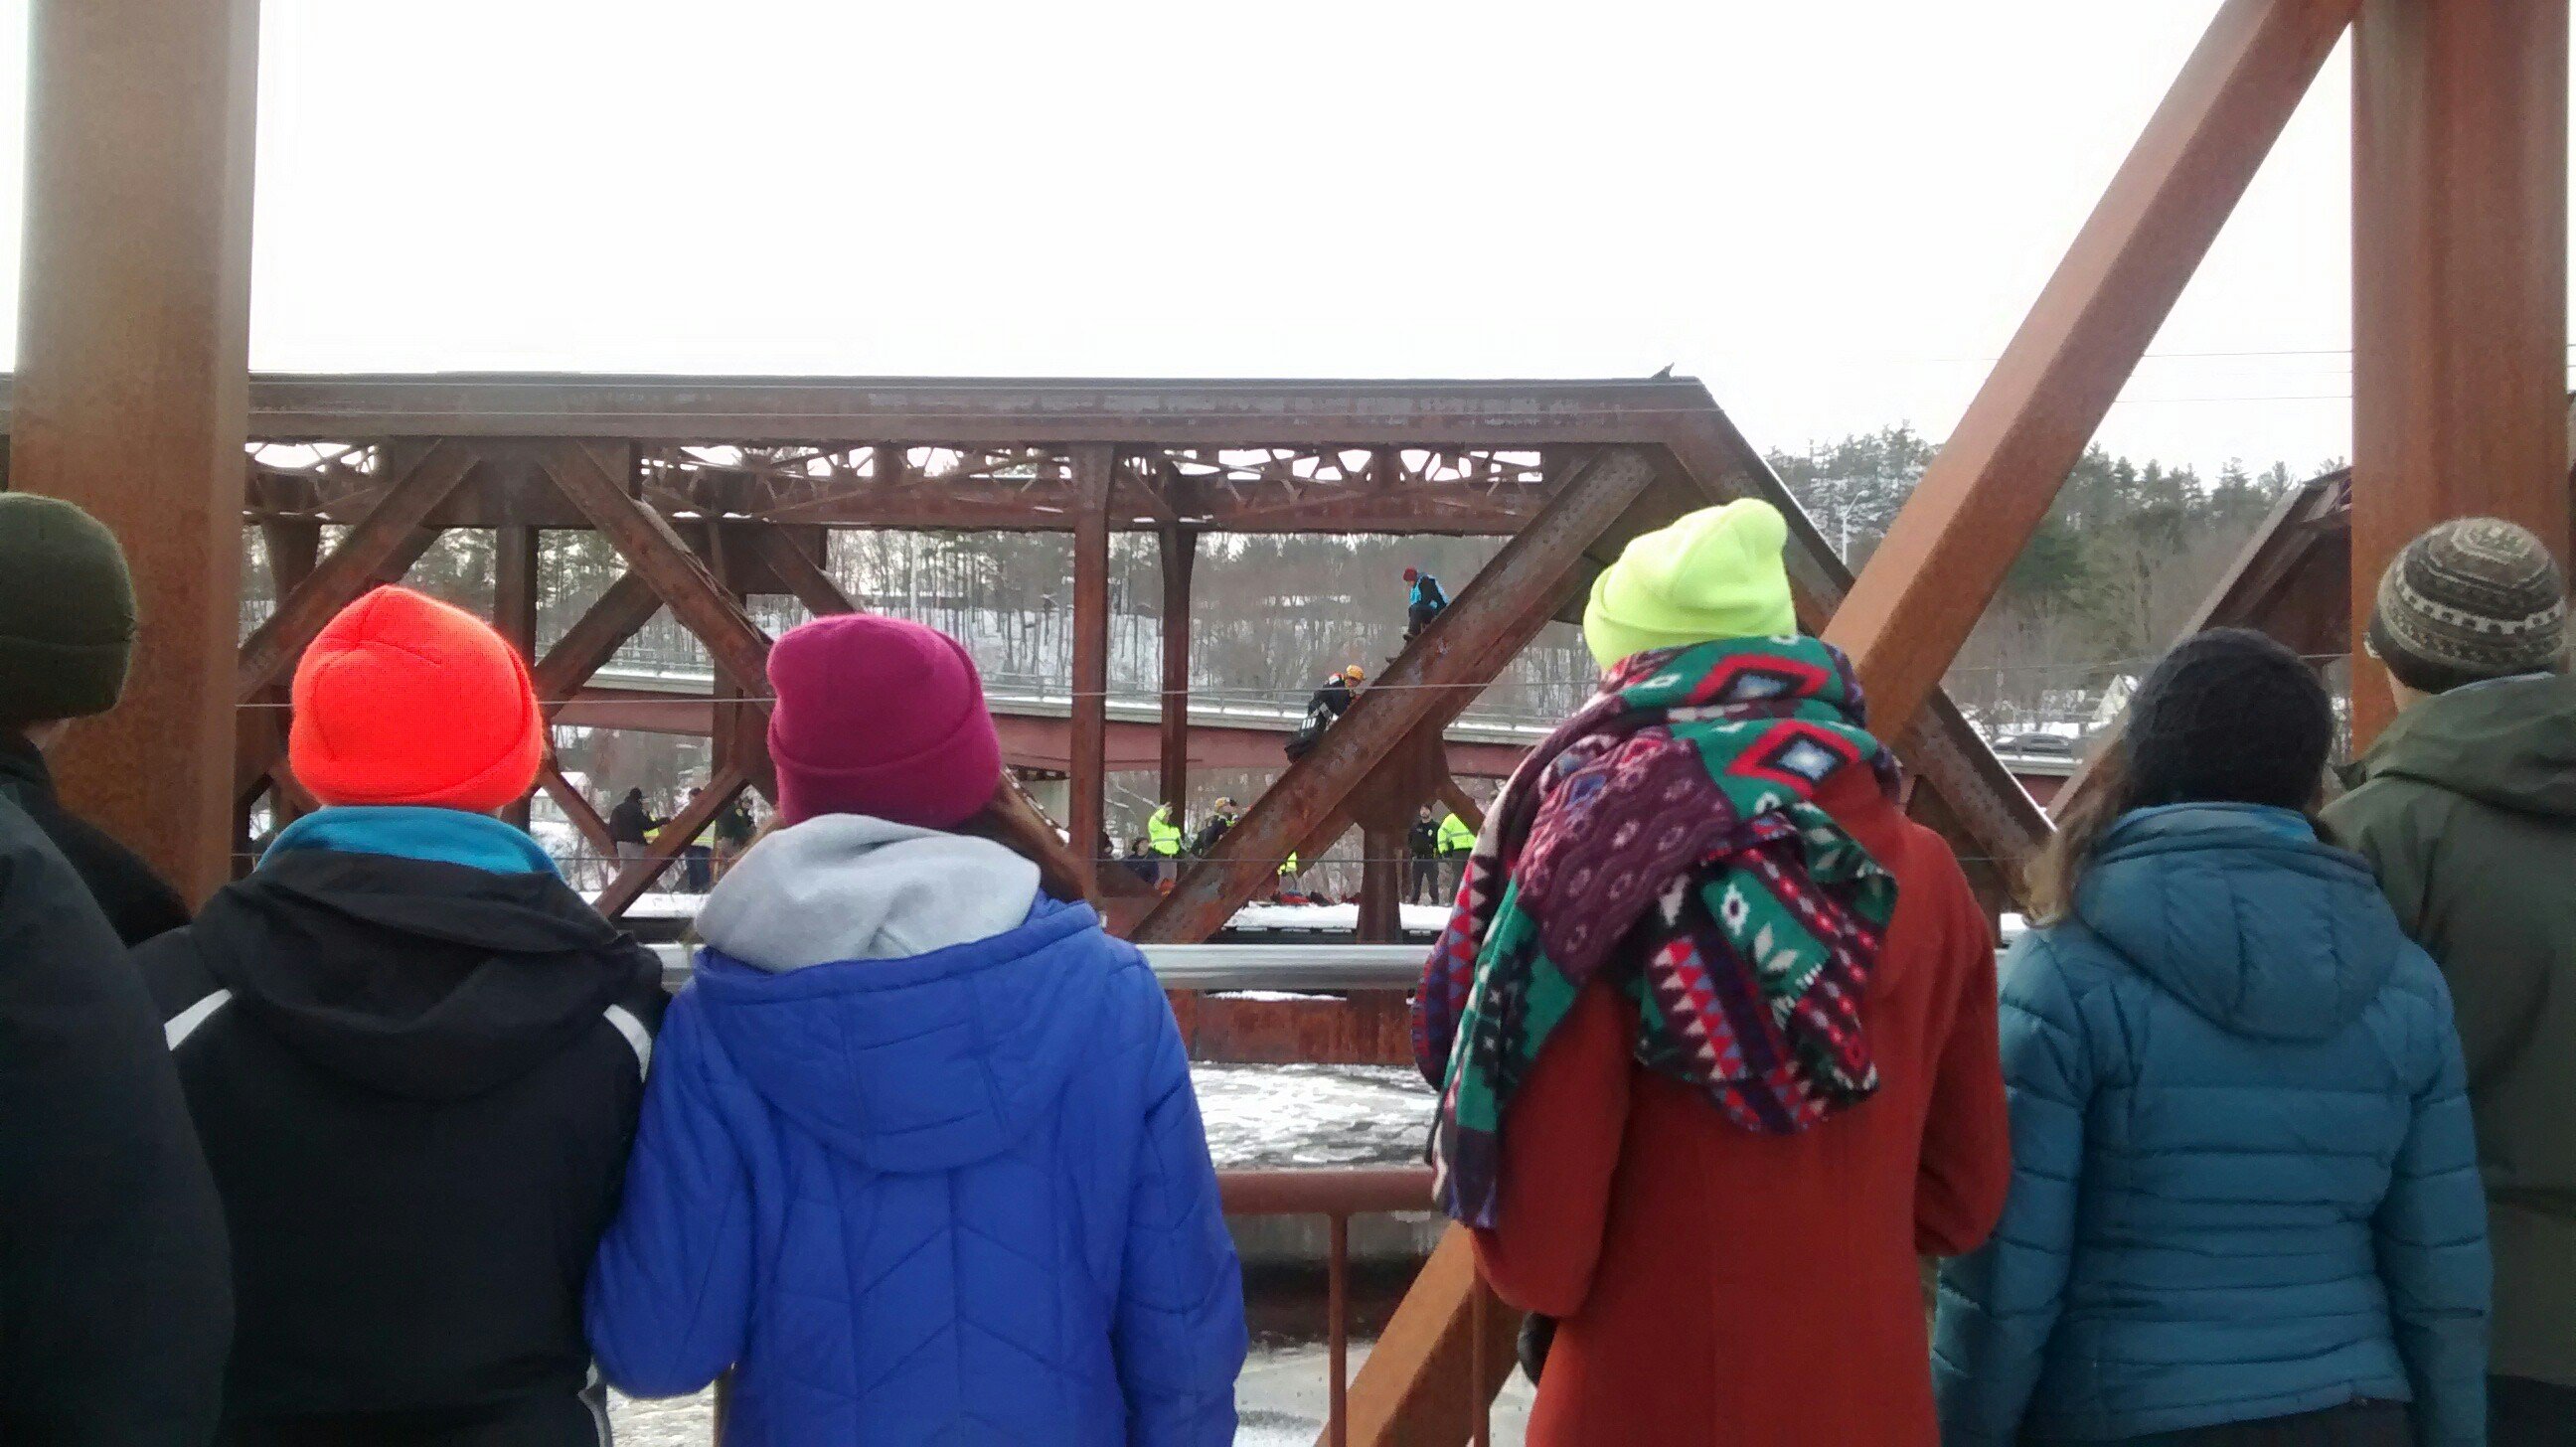 Supporters watch activists shut down a bridge in New Hampshire.